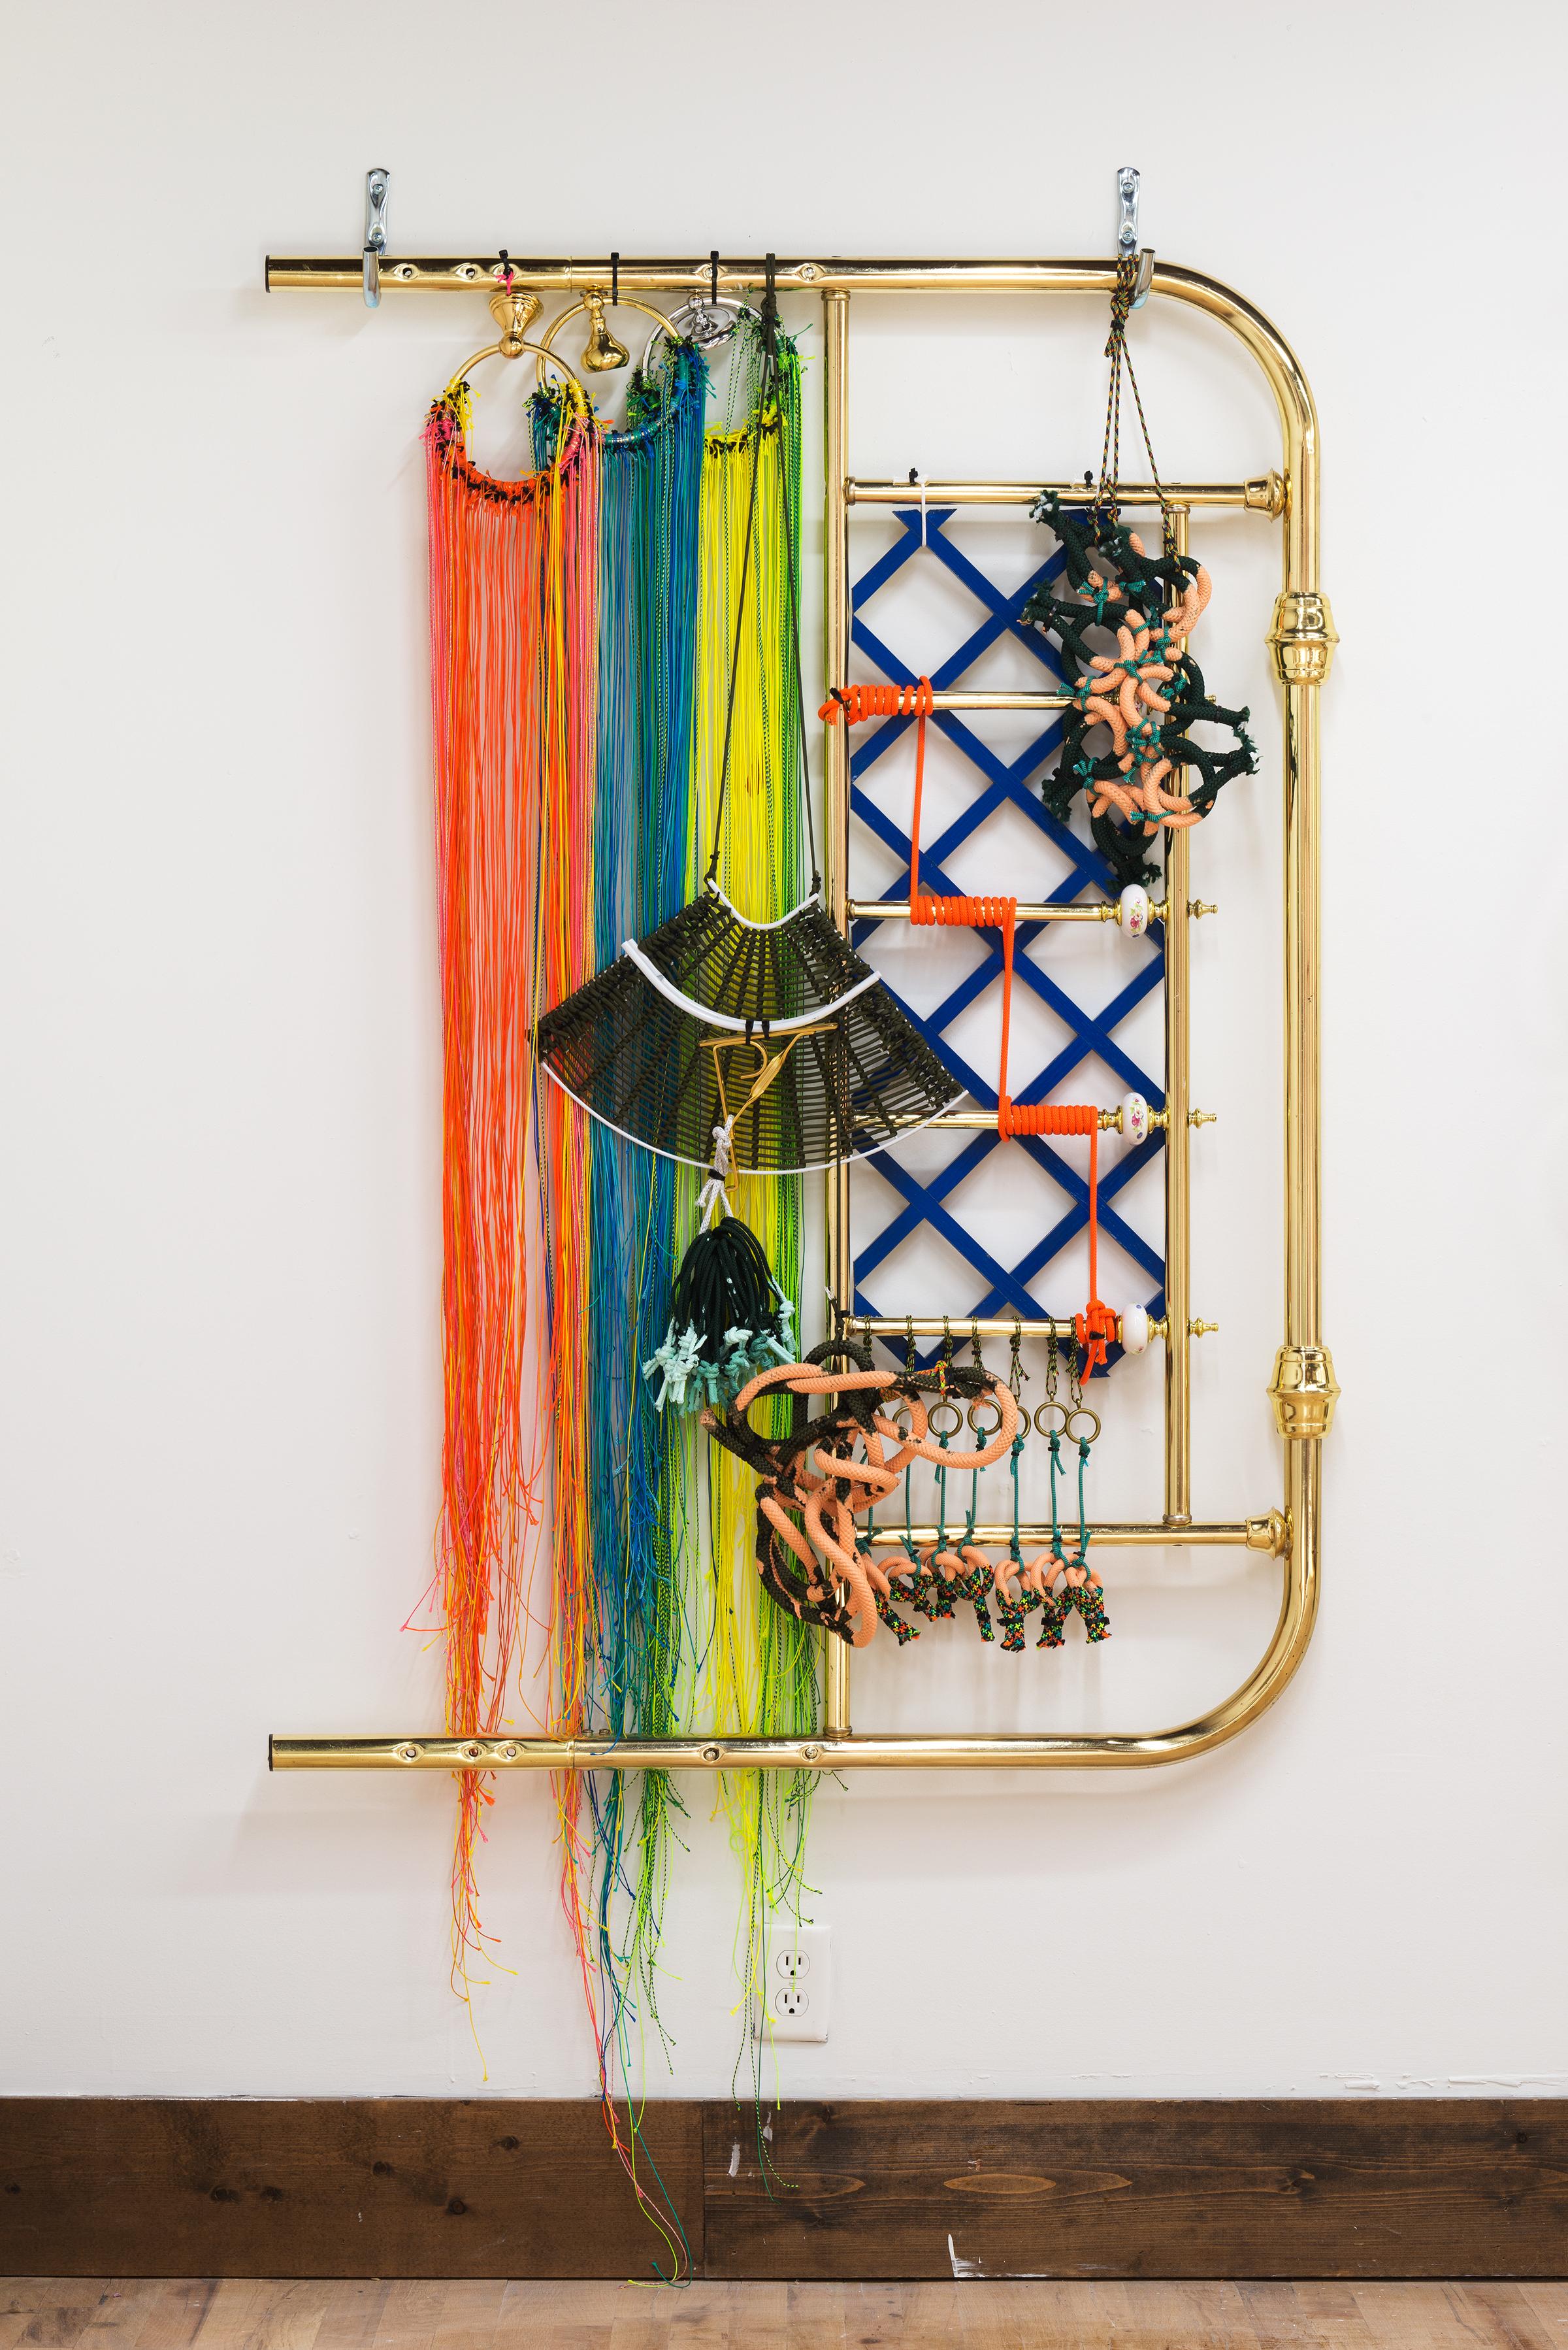 Liz Miller Abstract Sculpture - ADORNED OBSOLESCENCE 4 - Sculptural Wall Hanging w/ Found & Repurposed Objects